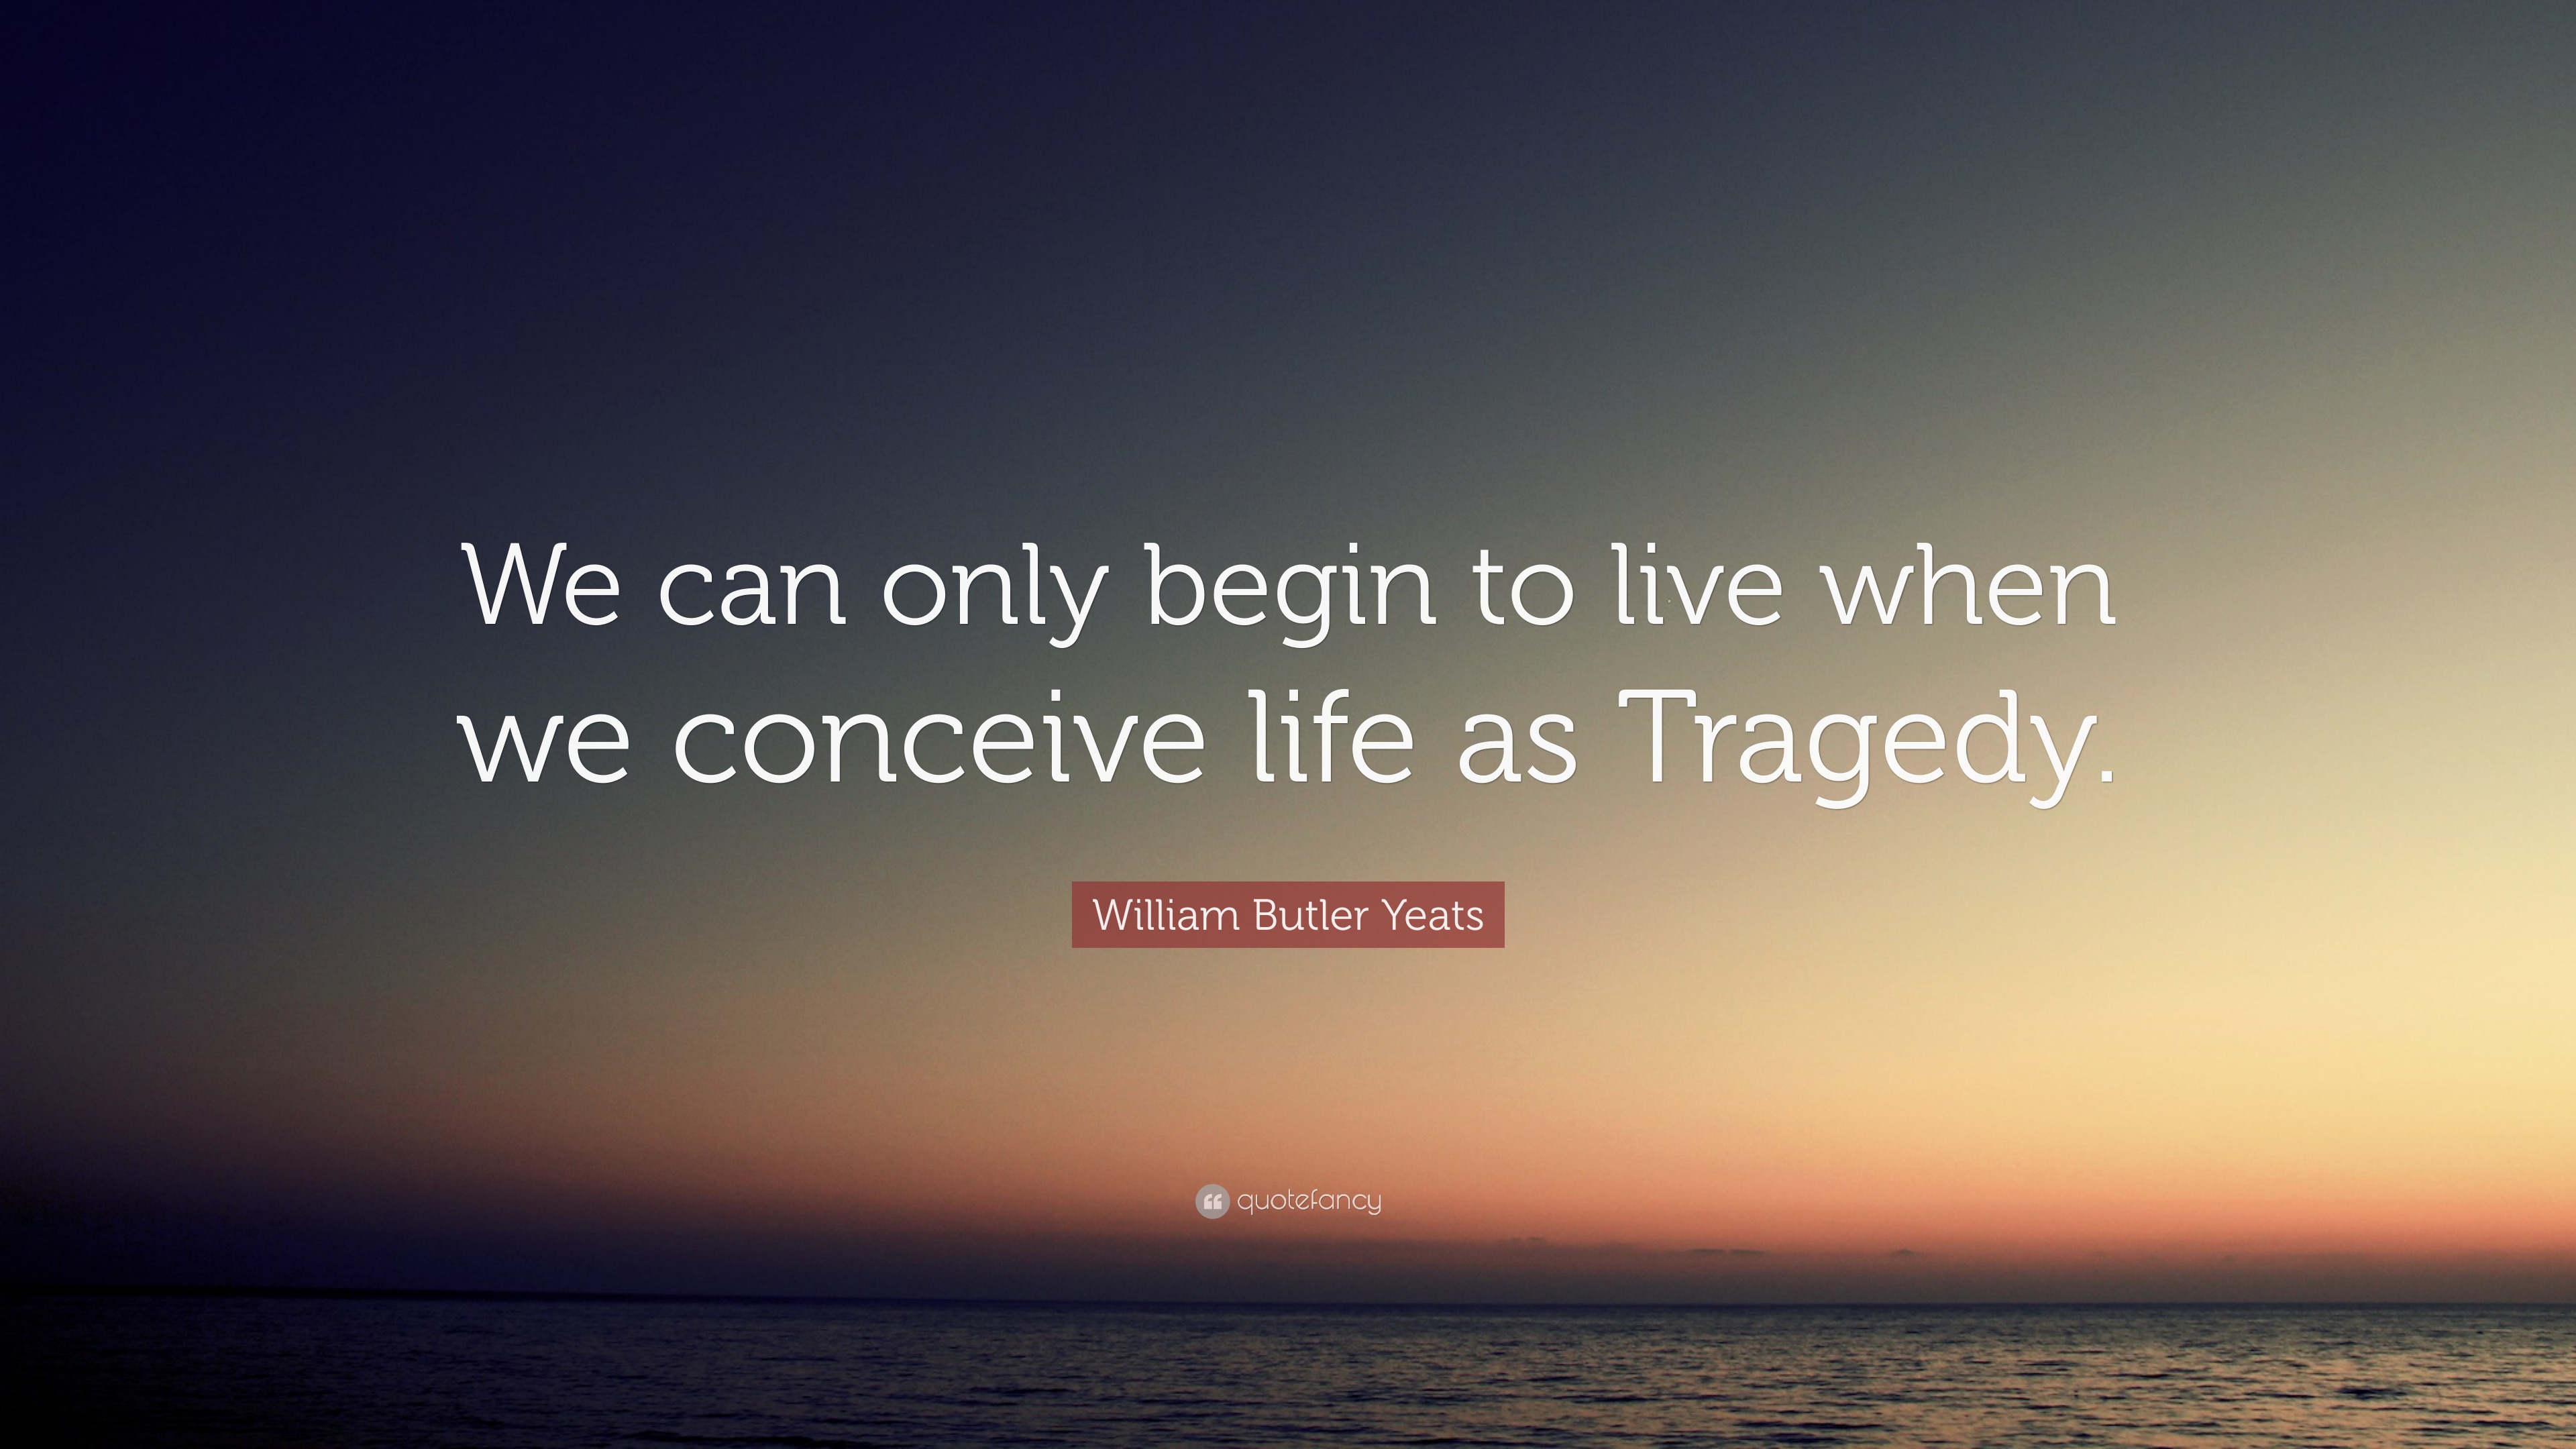 butler yeats quote: "we can only begin to live when we conceive